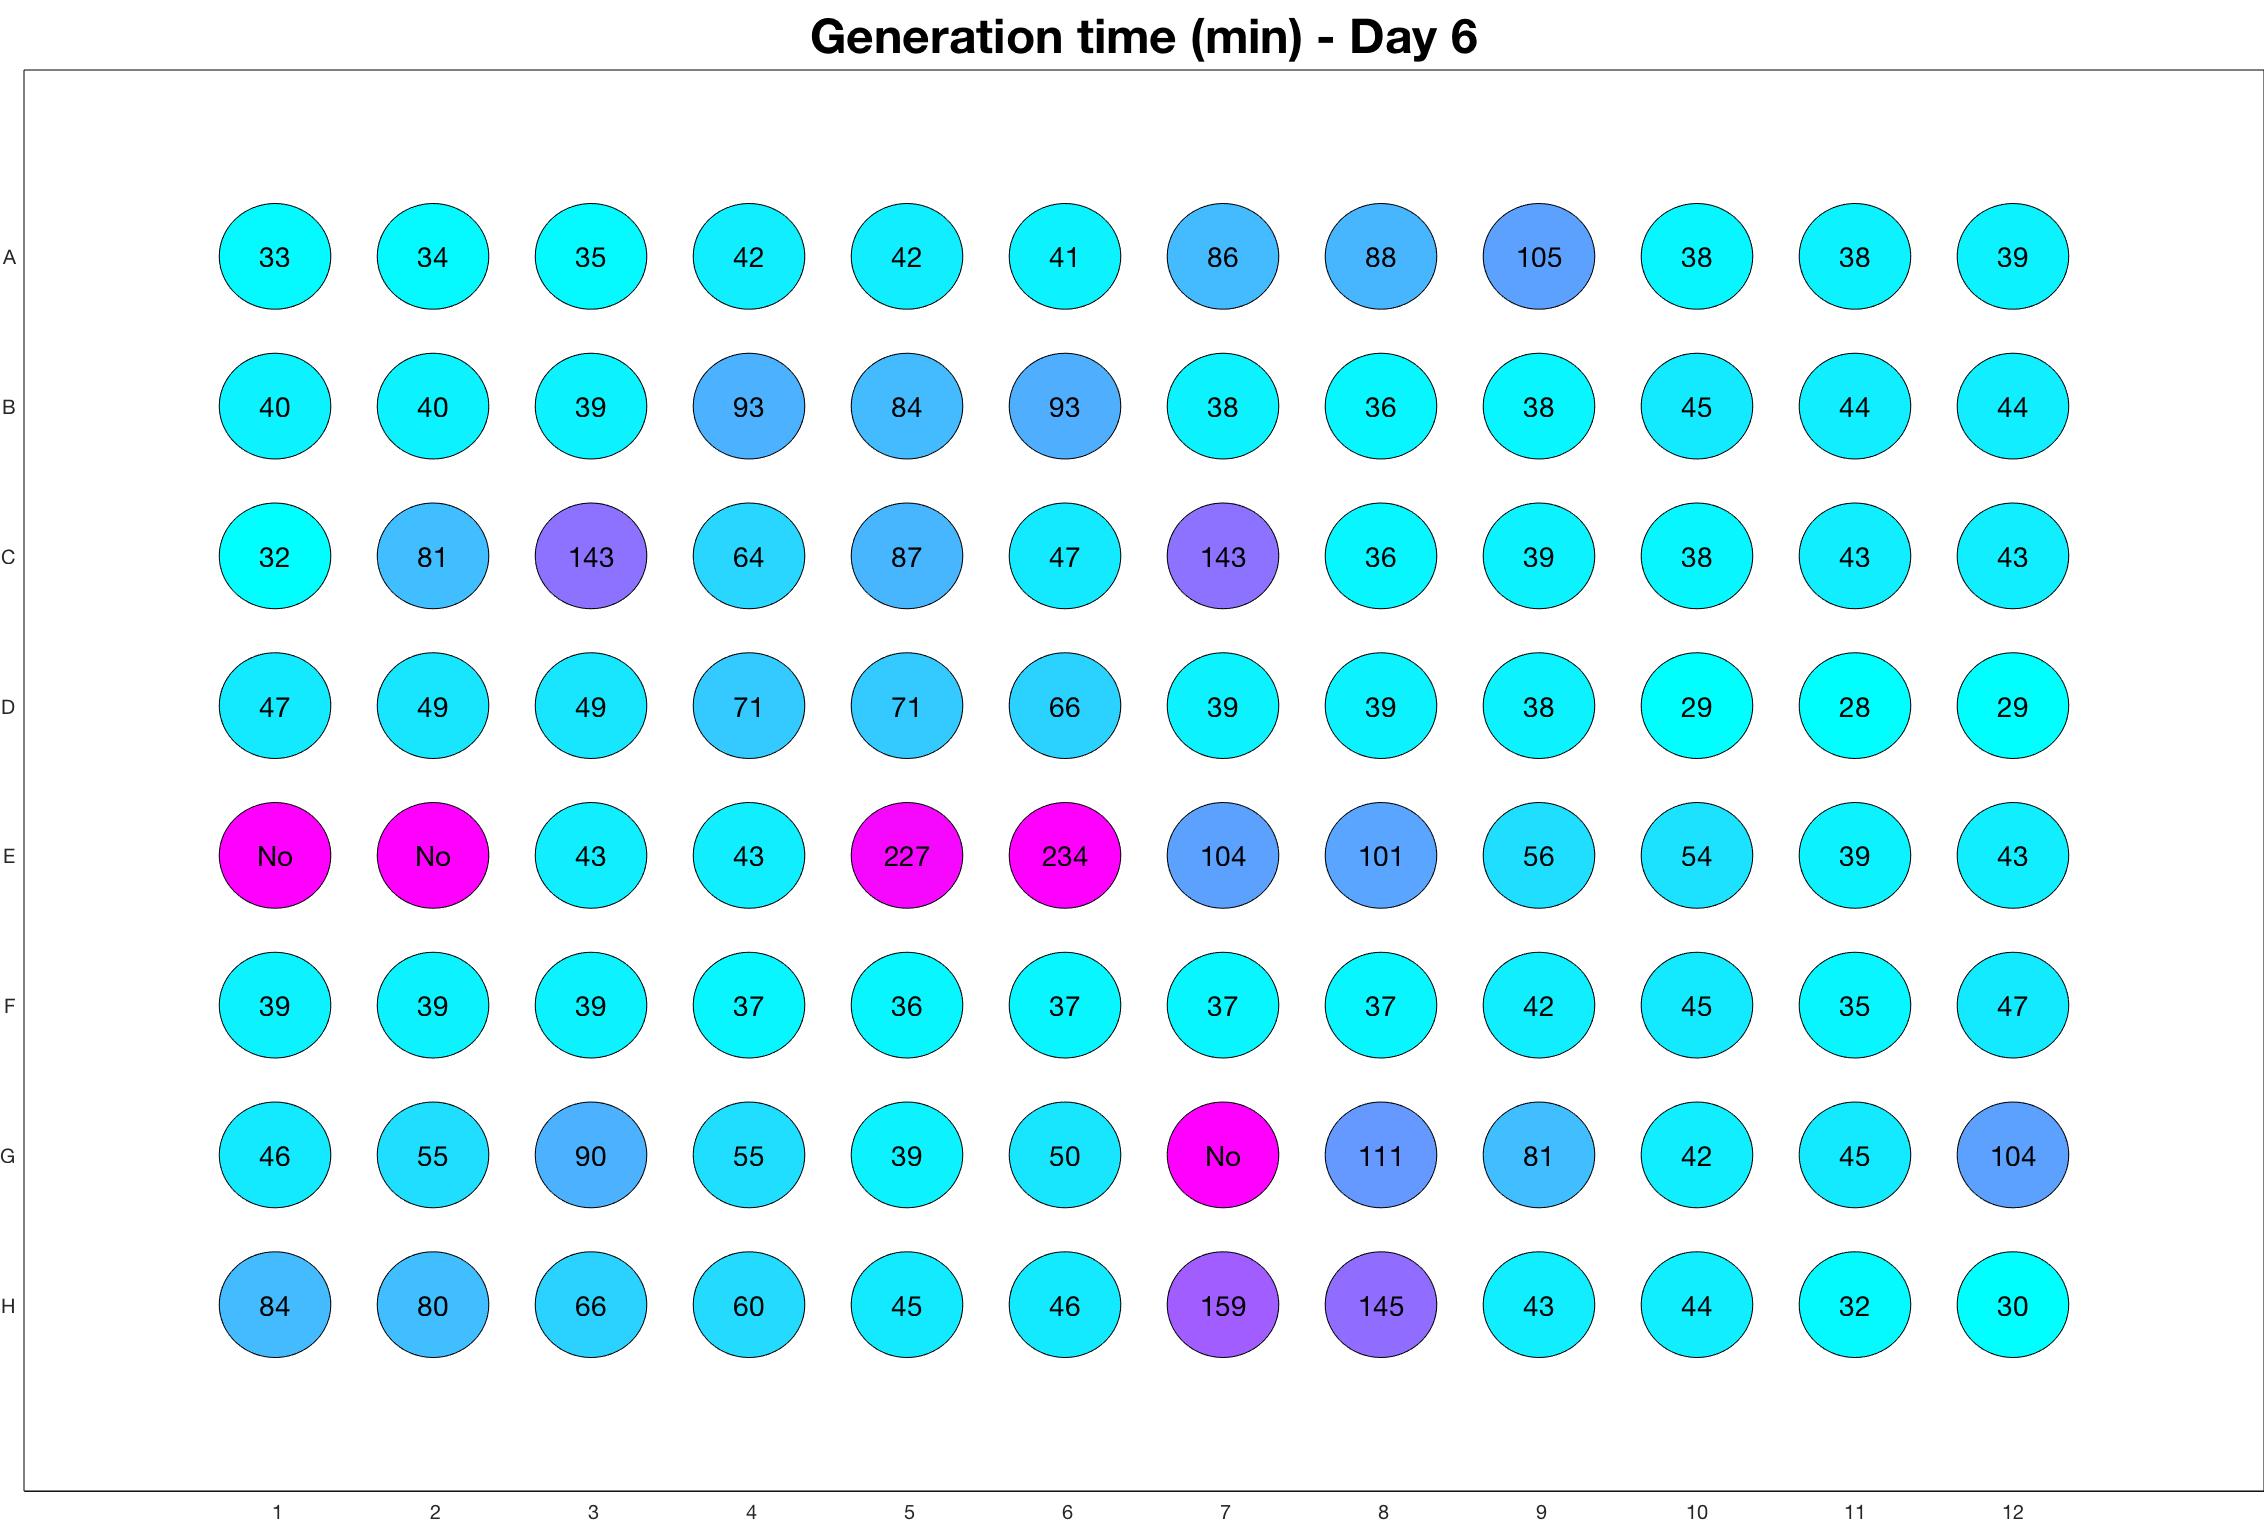 Generation time for day - 6.jpg